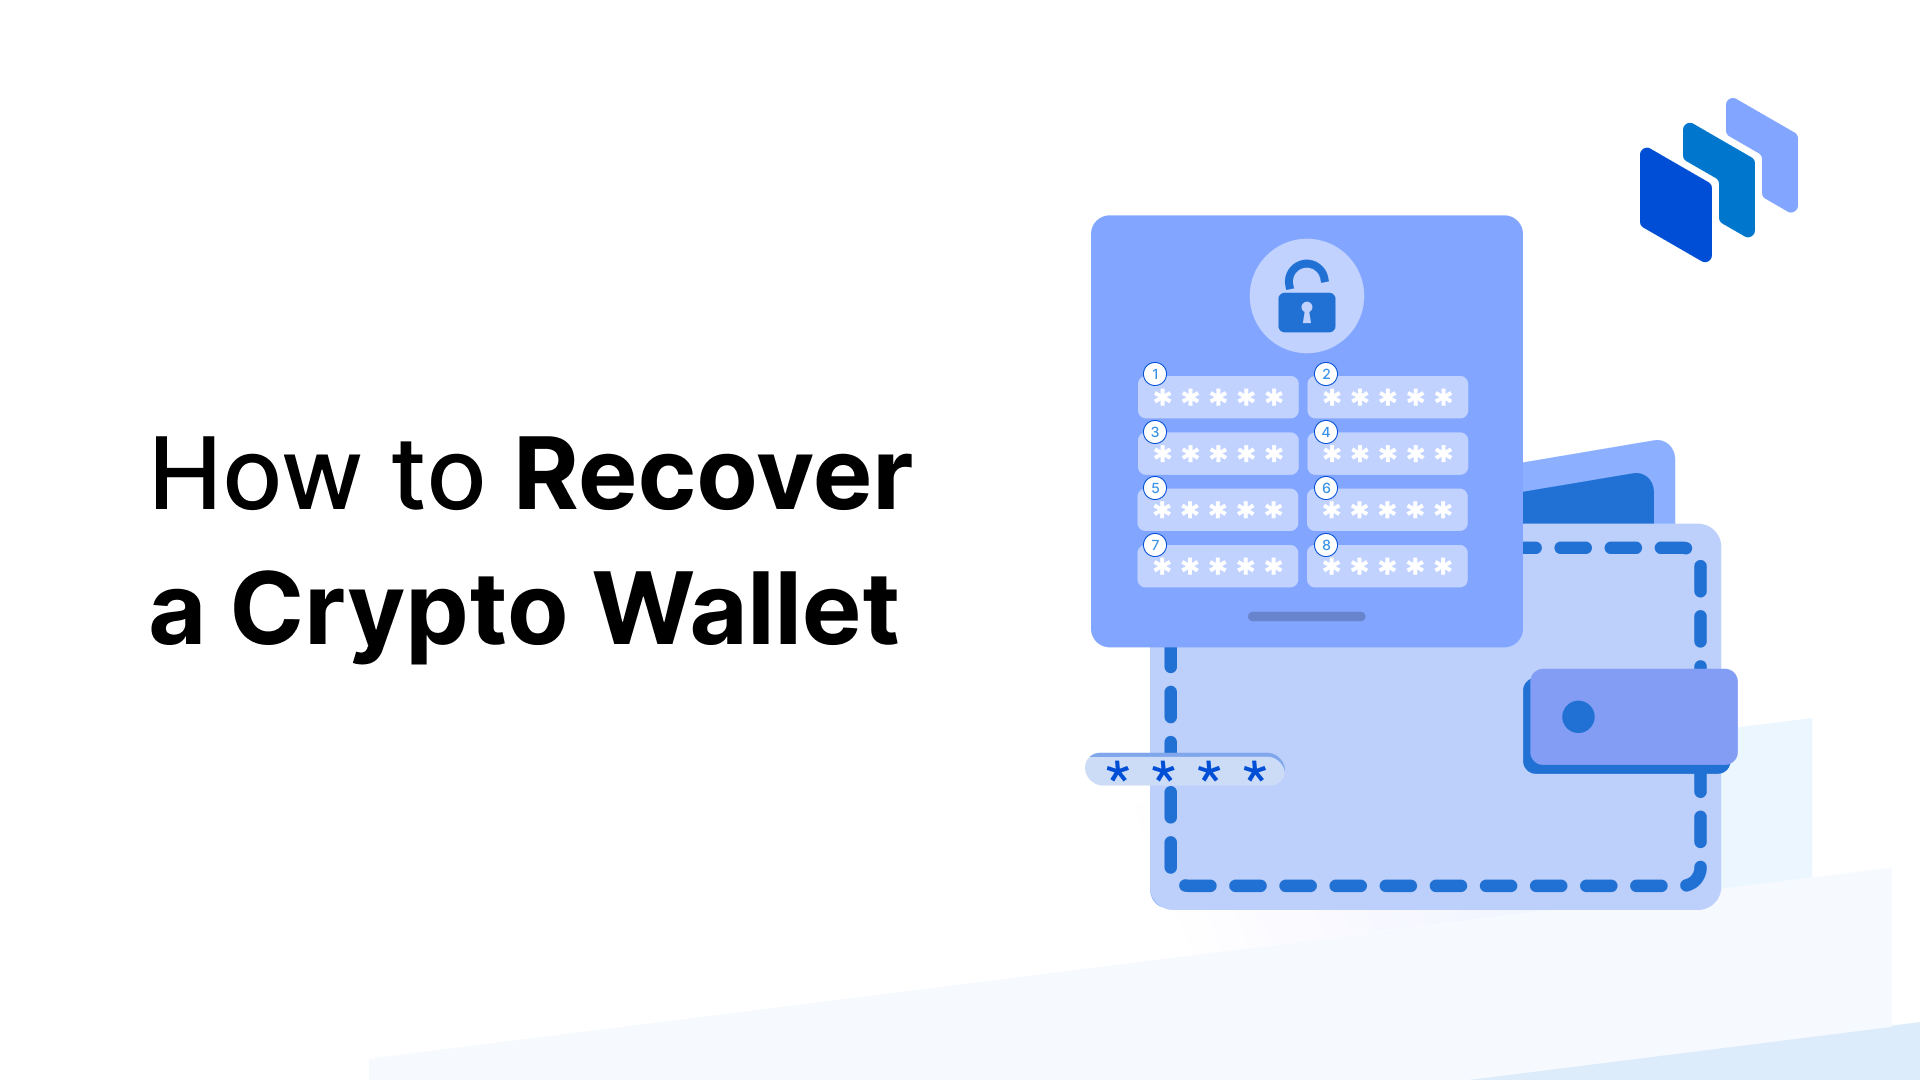 How to Recover a Crypto Wallet